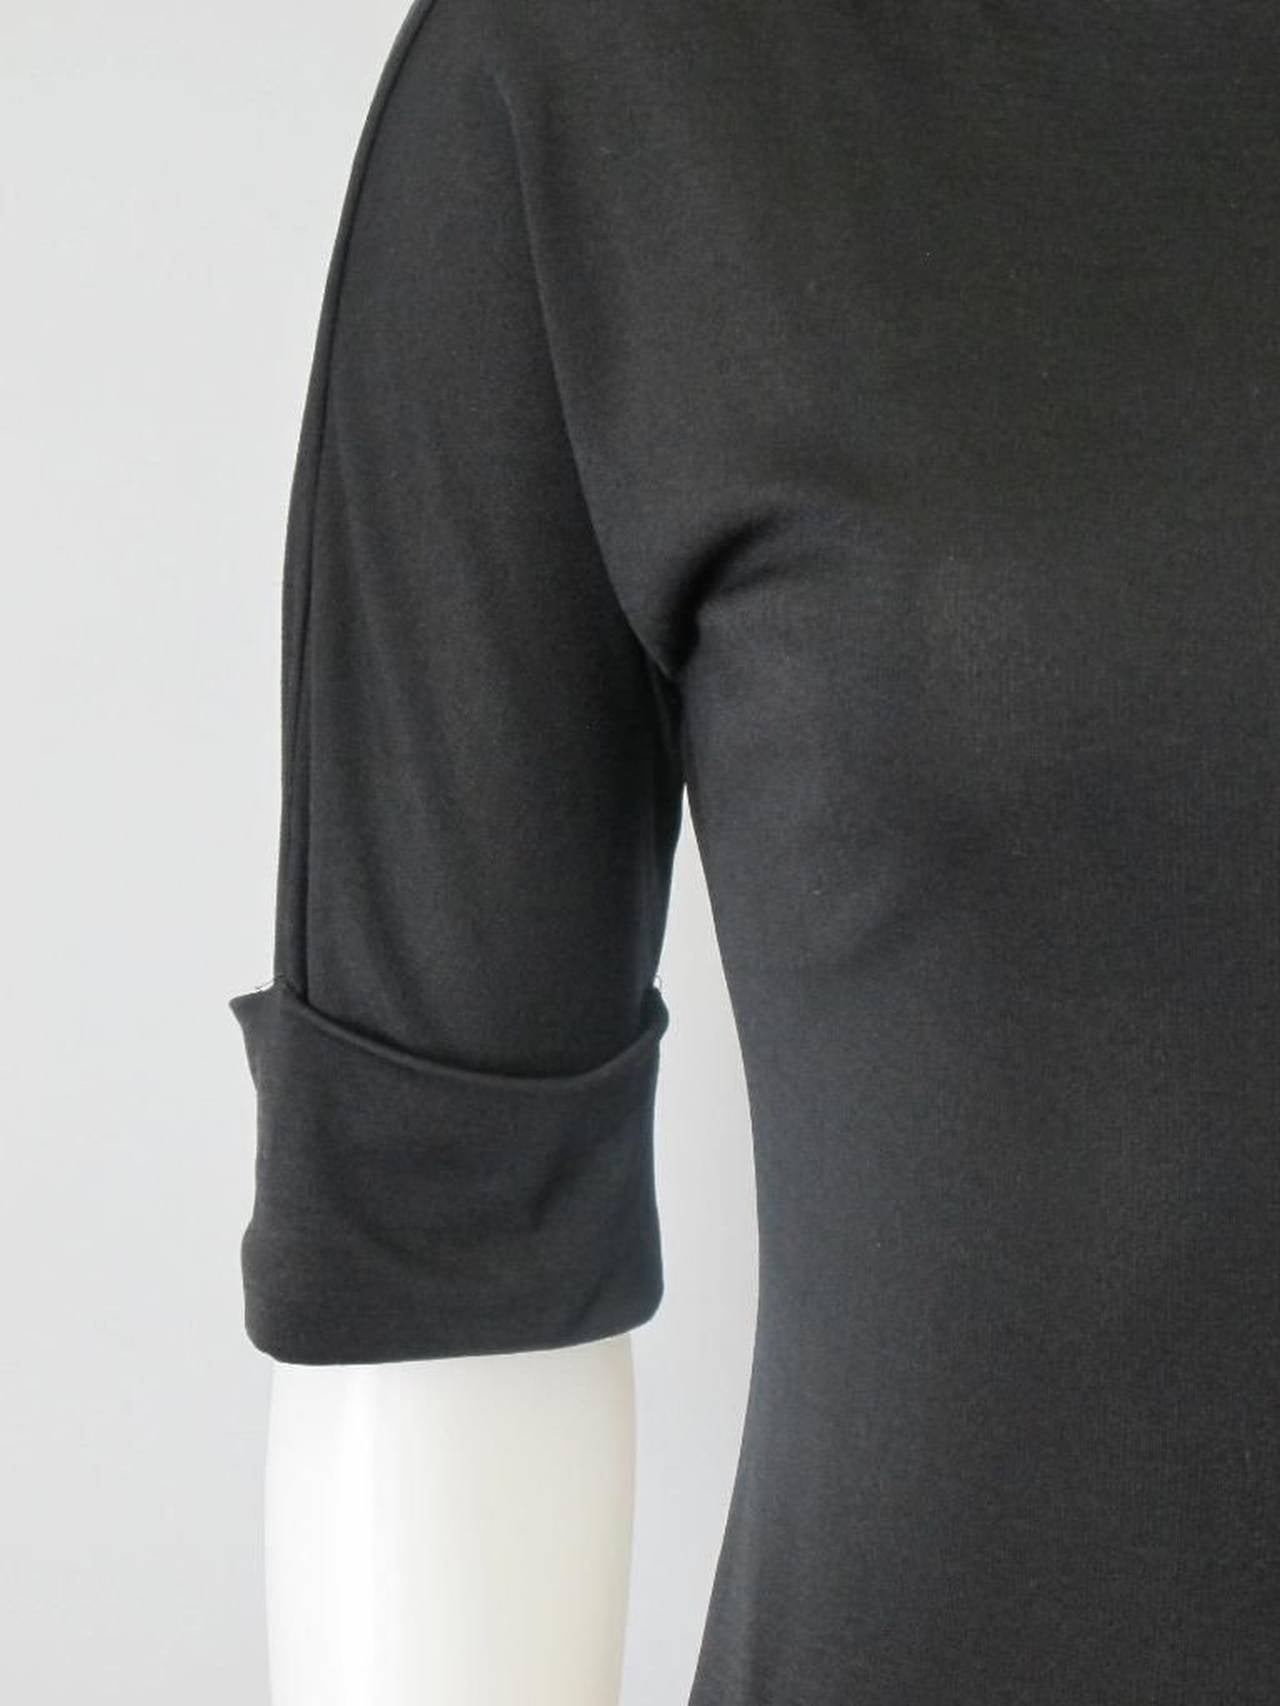 Women's Late 1960s or early 70s Couture Emilio Pucci Black Silk Slashed Tie Top For Sale